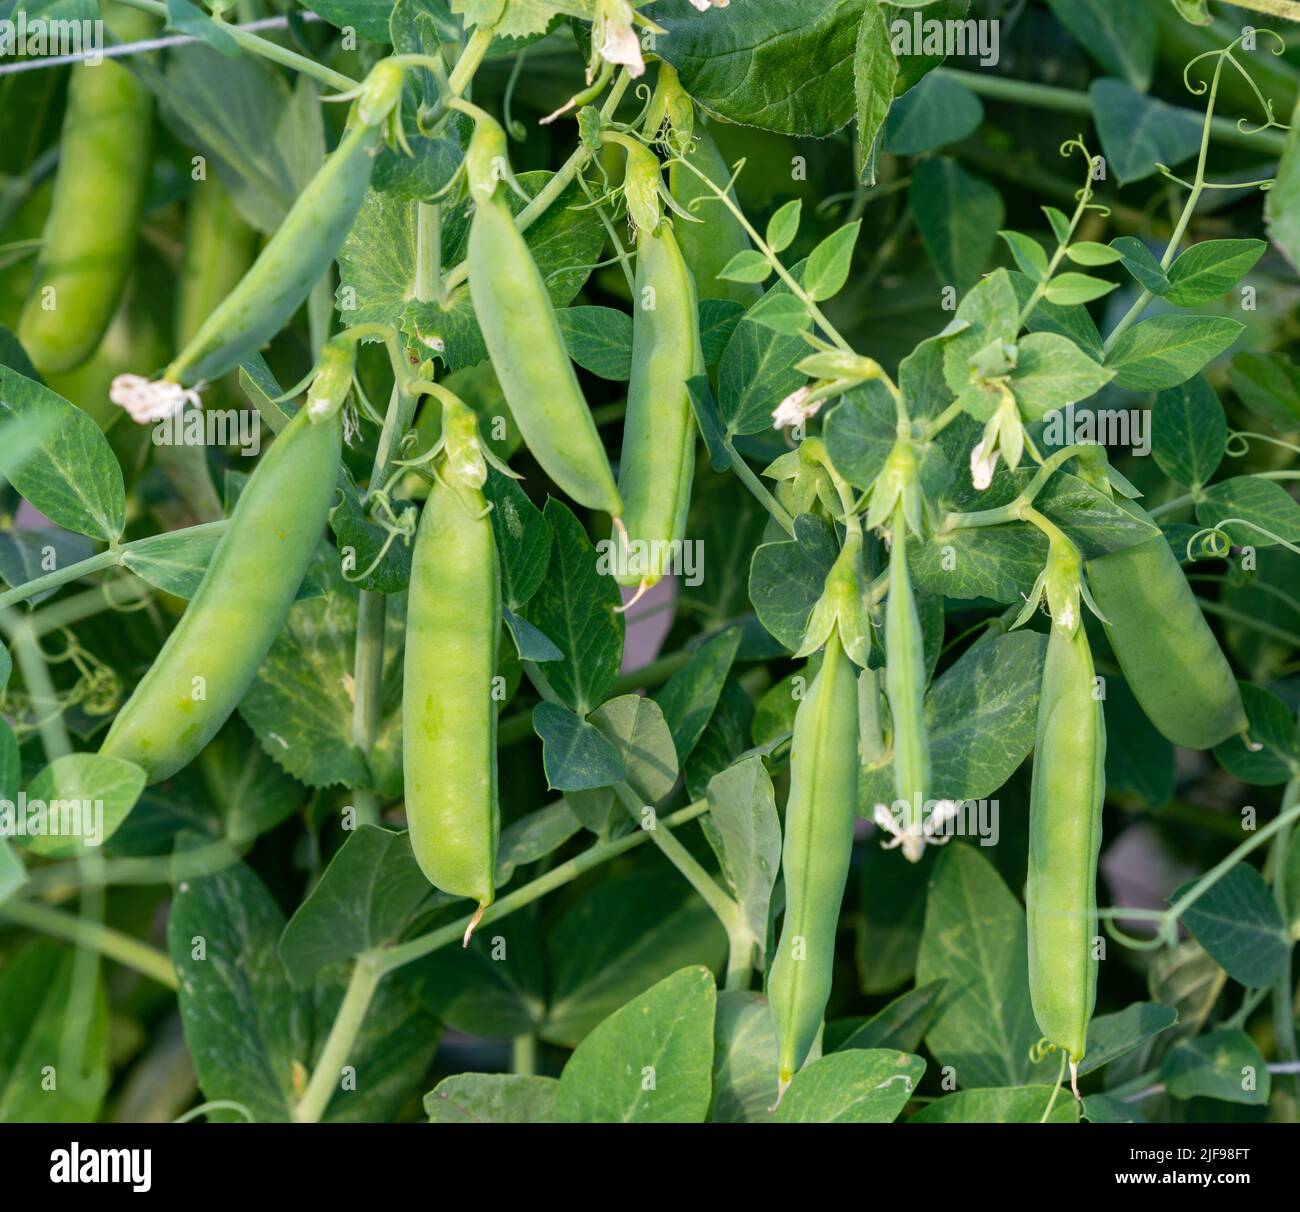 Bush of sweet pea with ripe pods cultivated on vegetable garden Stock Photo